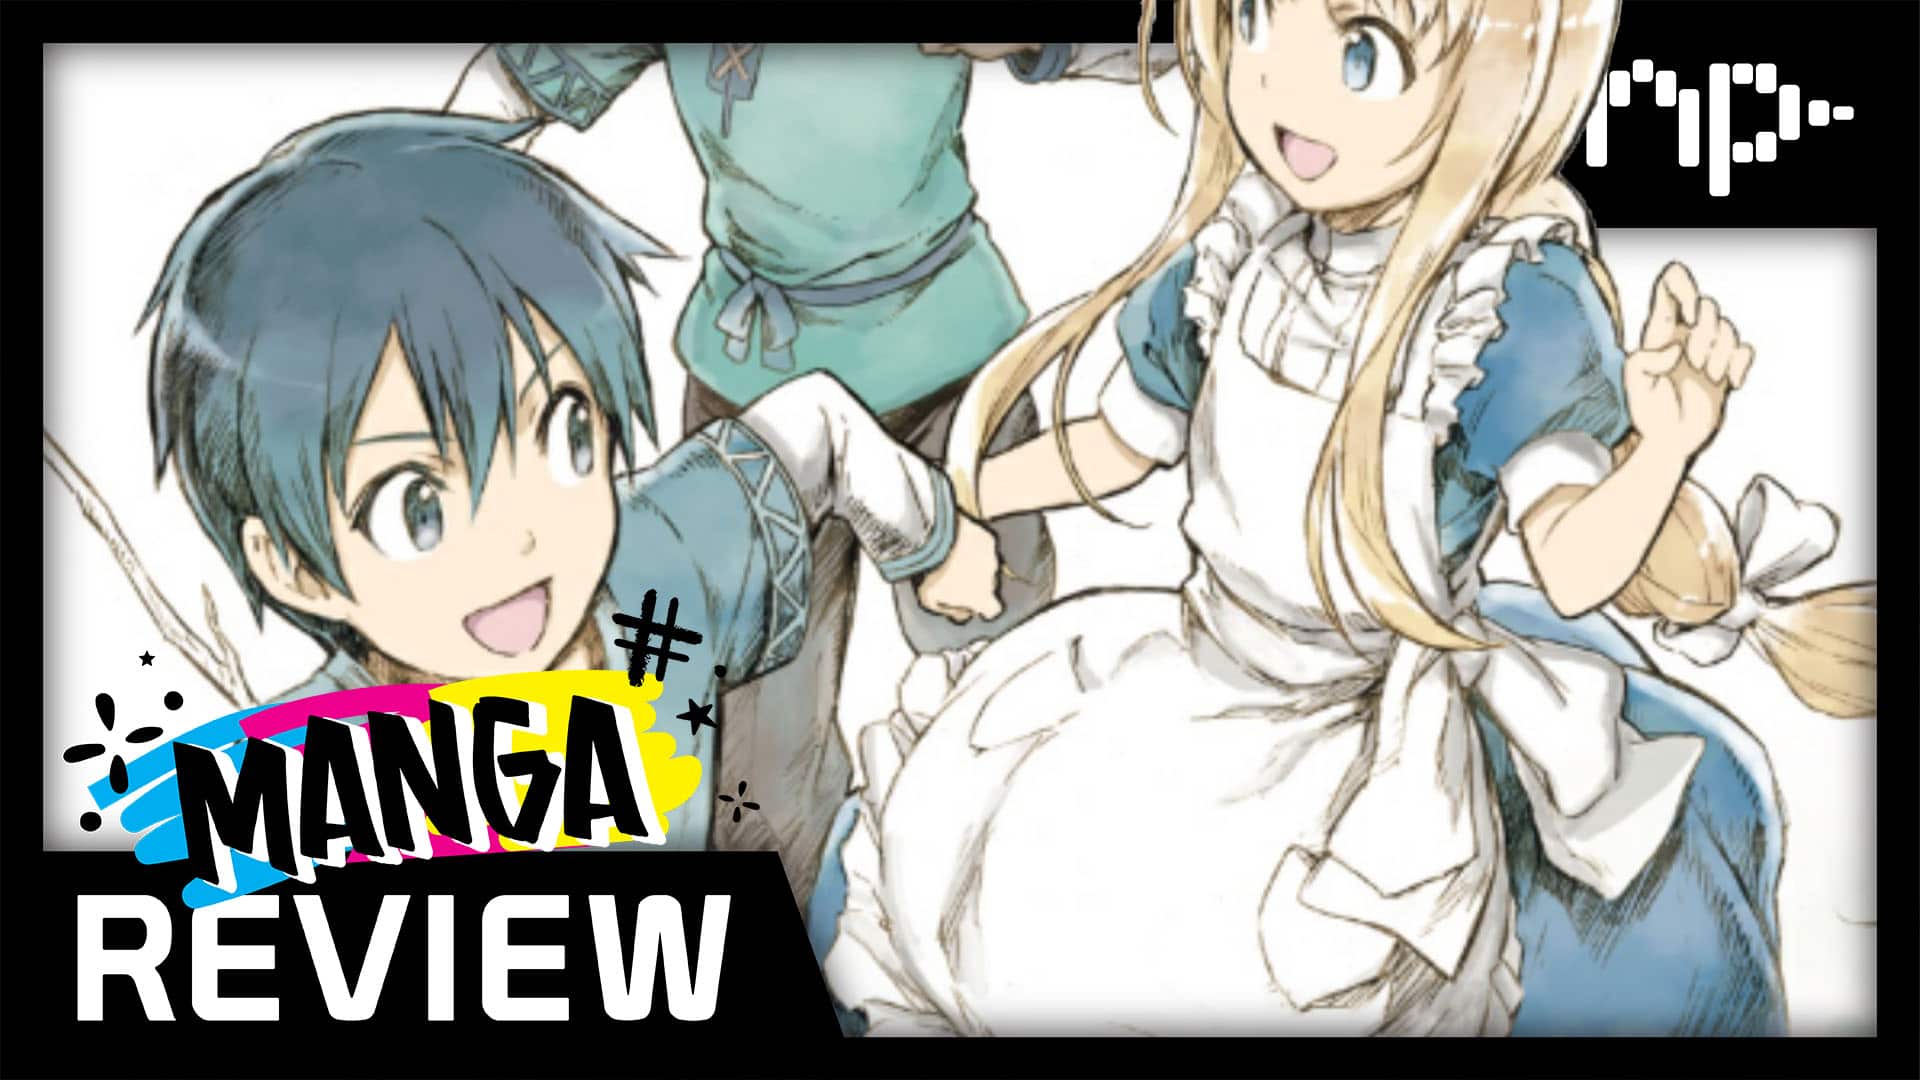 Sword Art Online: Project Alicization Vol. 1 Manga Review – Just the Beginning of a Grand Adventure